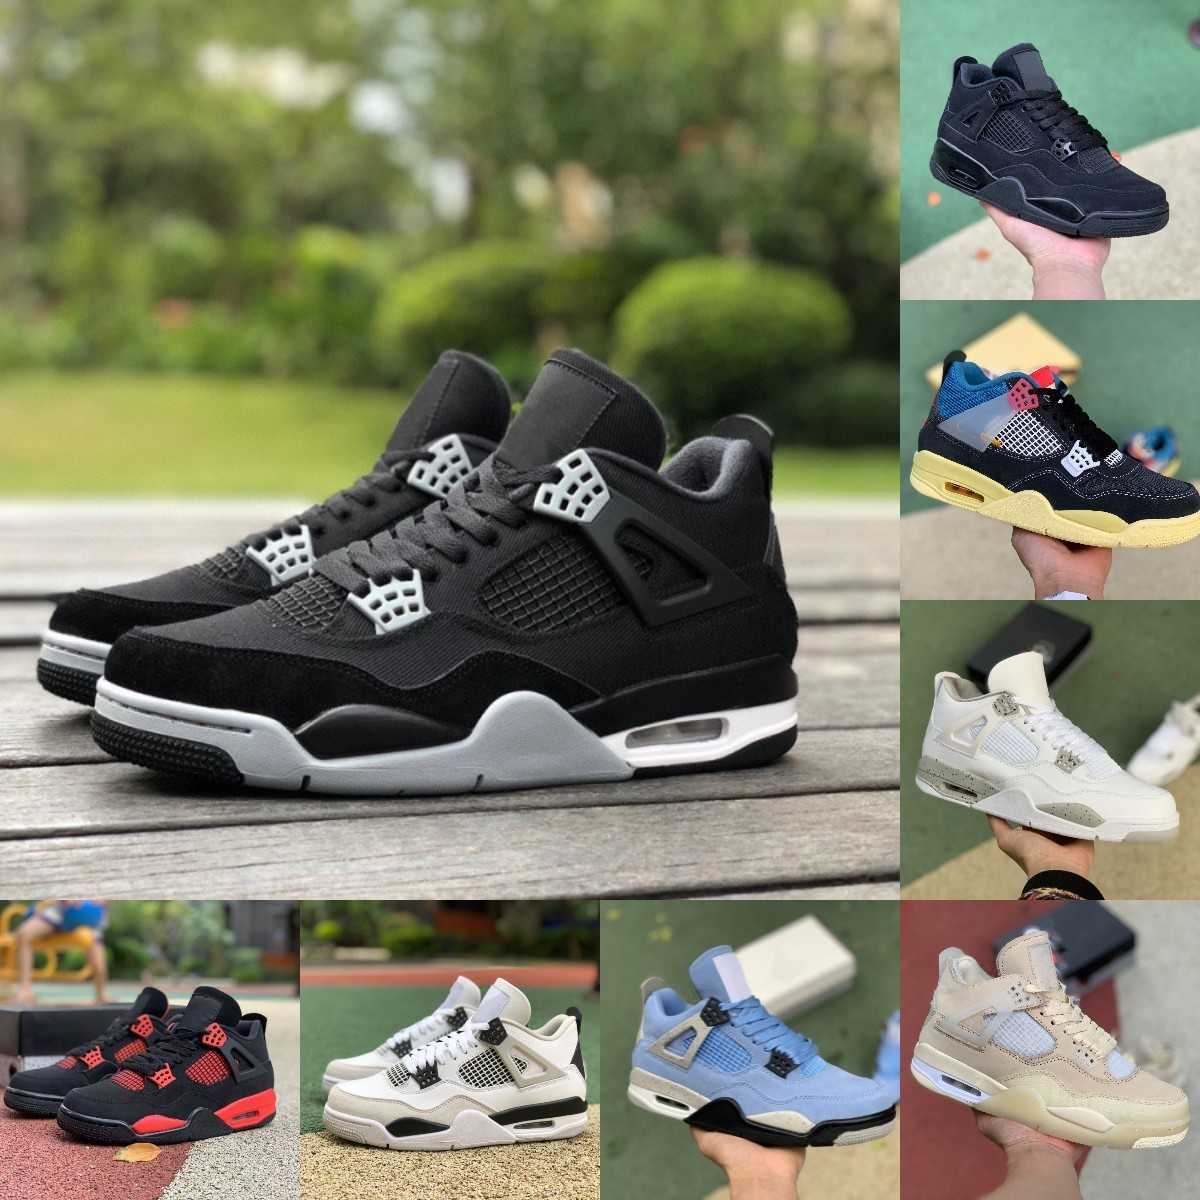 

2023 Jumpman Black Canvas 4 4s Basketball Shoes University Blue Mens Military Cement Cat Cream Sail White Oreo Infrared Canyon Purple Court Neon Trainer Sneakers S8, Please contact us